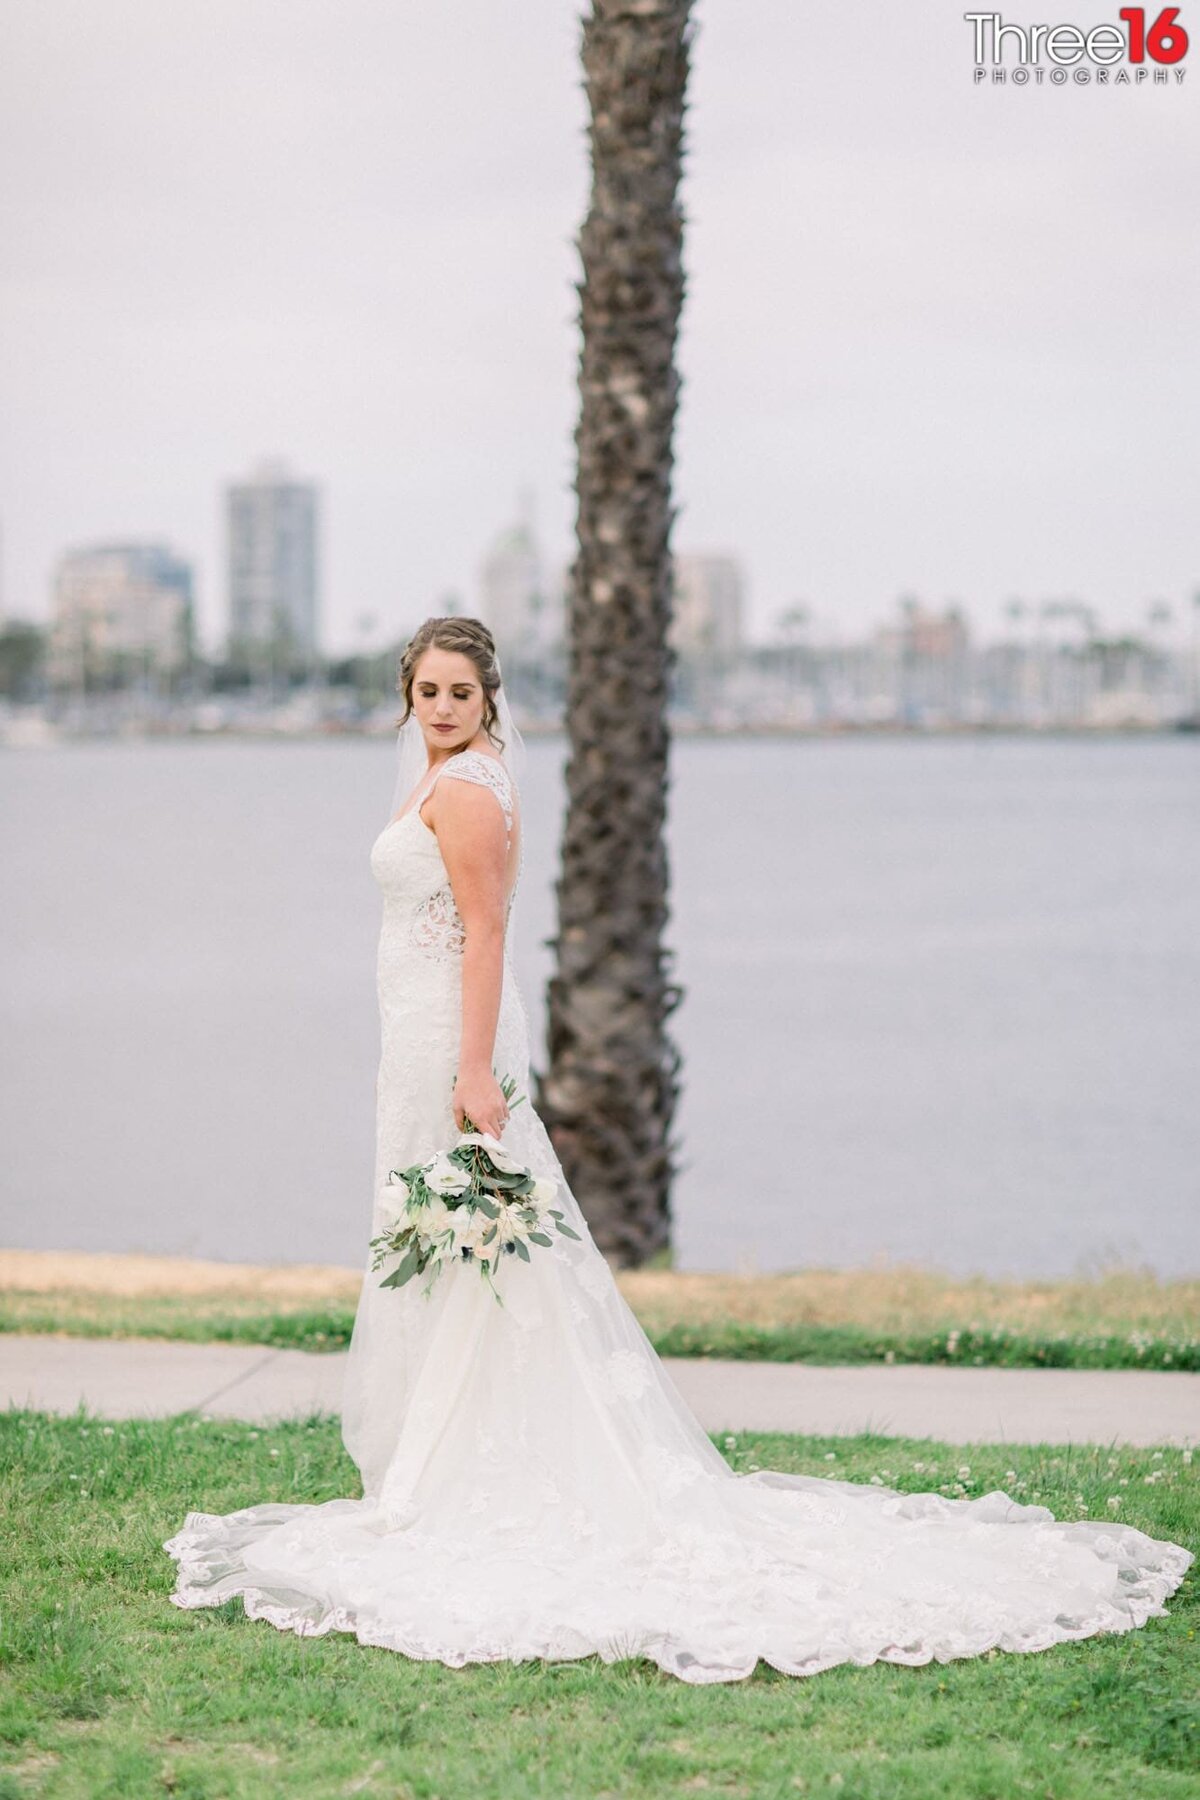 Bride poses by with her dress train fanned out next to the Long Beach Harbor